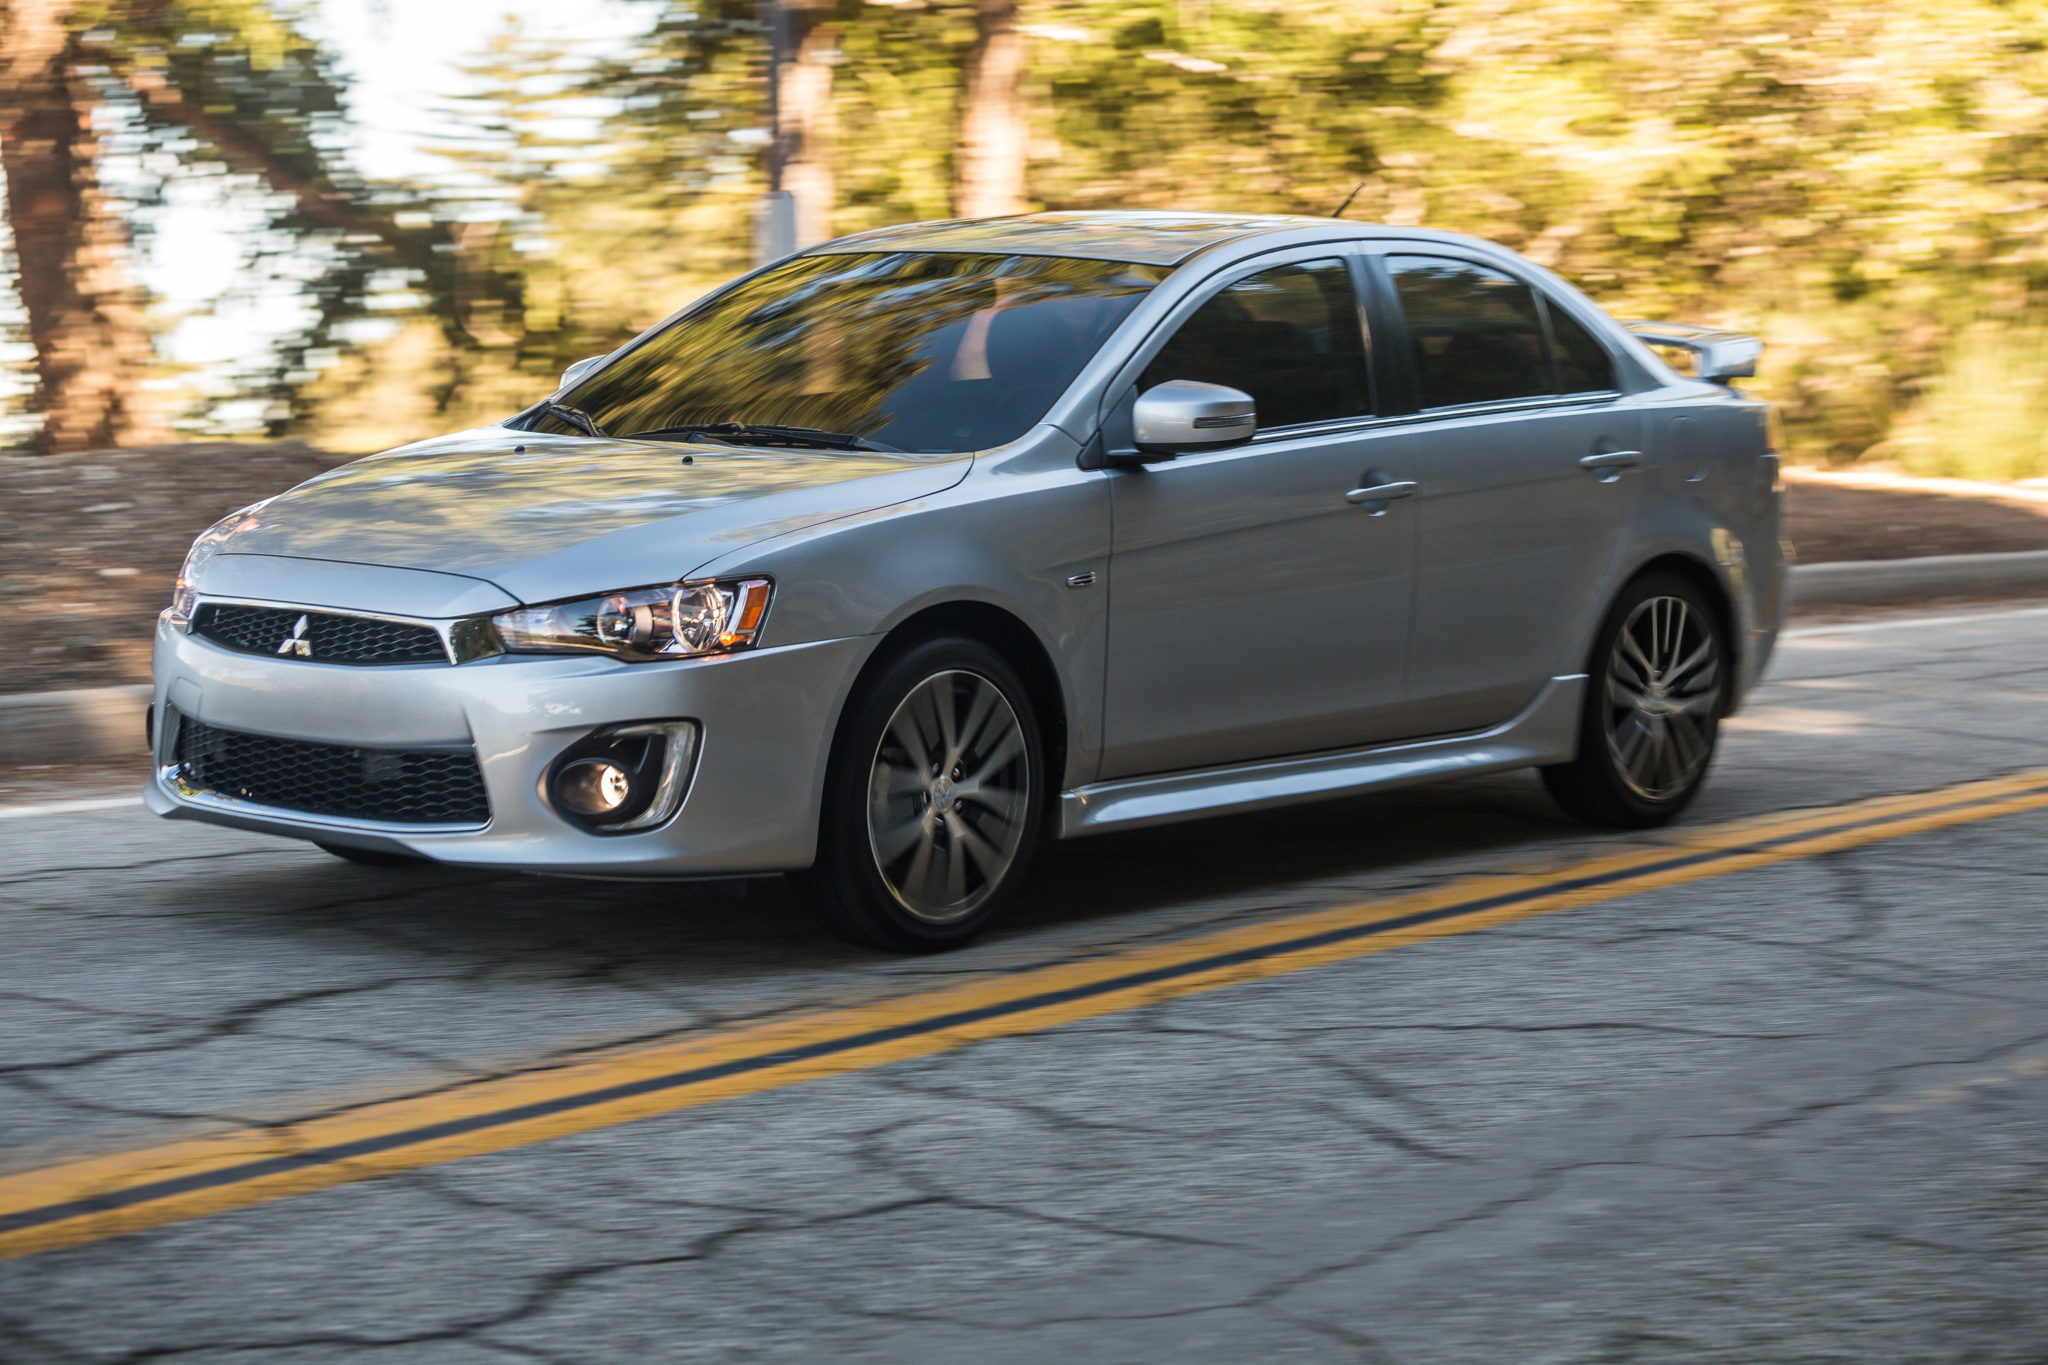 Pinky Review: The All-New Mitsubishi Lancer